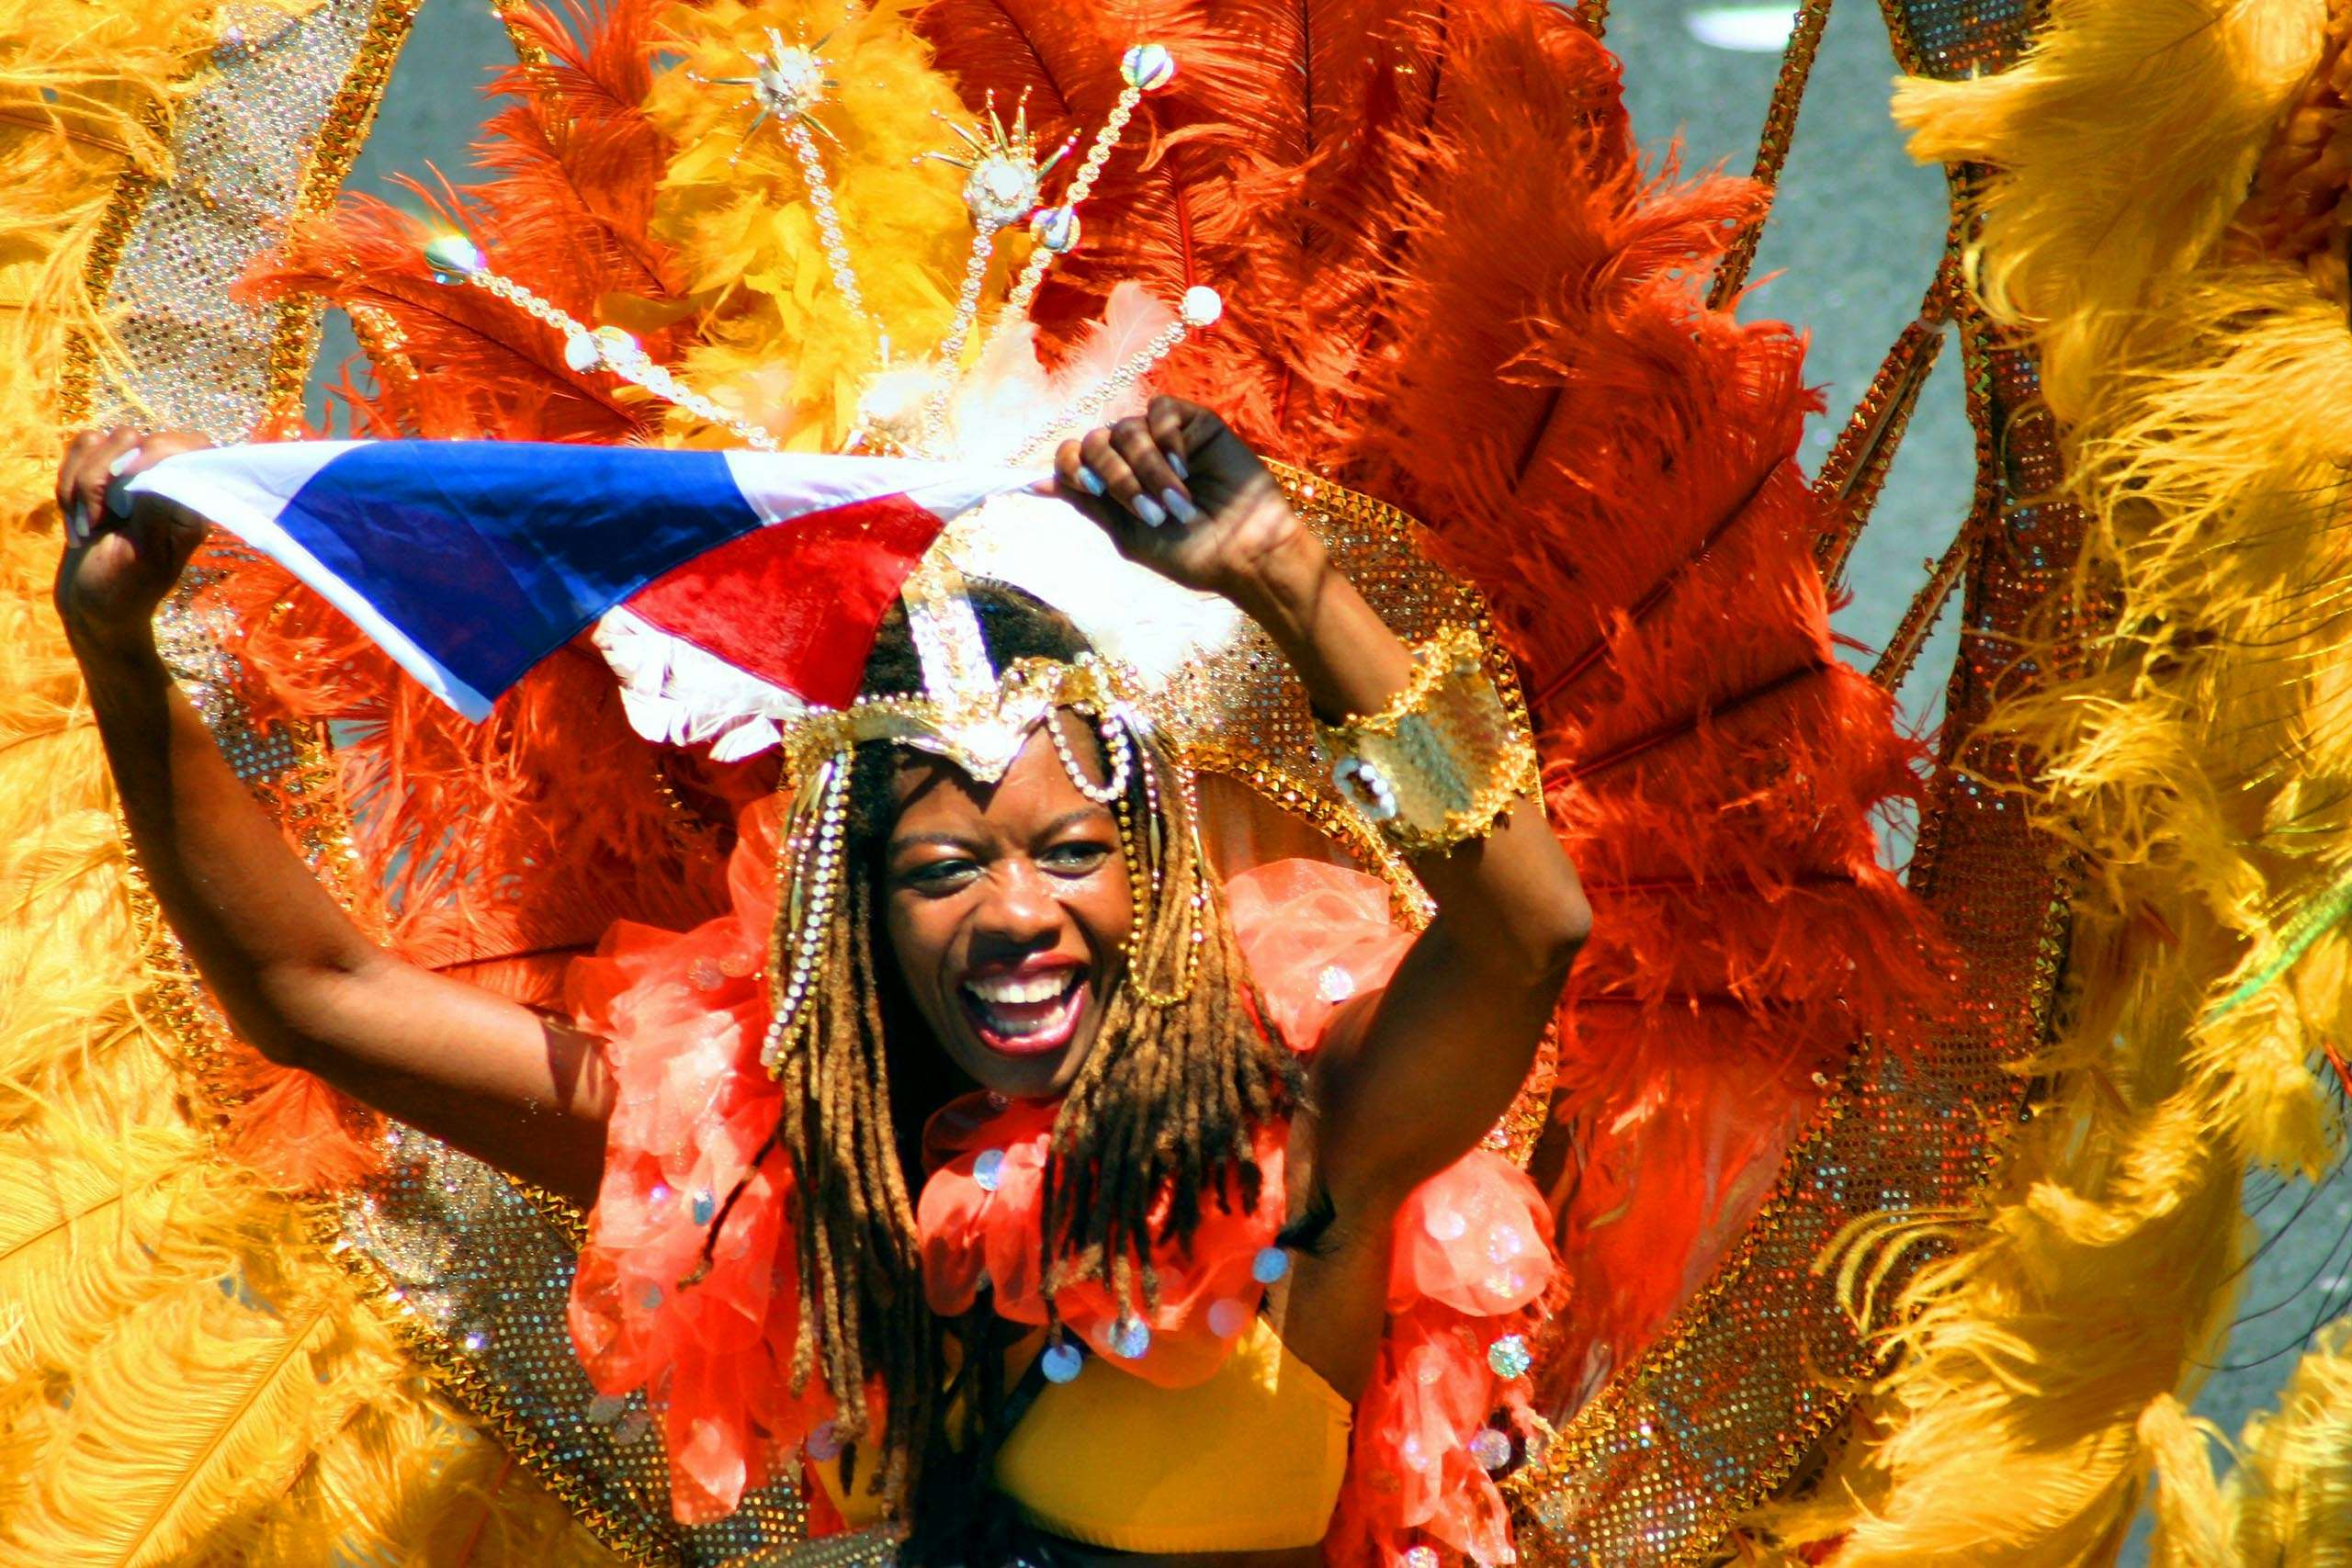 Bahamian woman dressed with typical Bahamian custom during festival